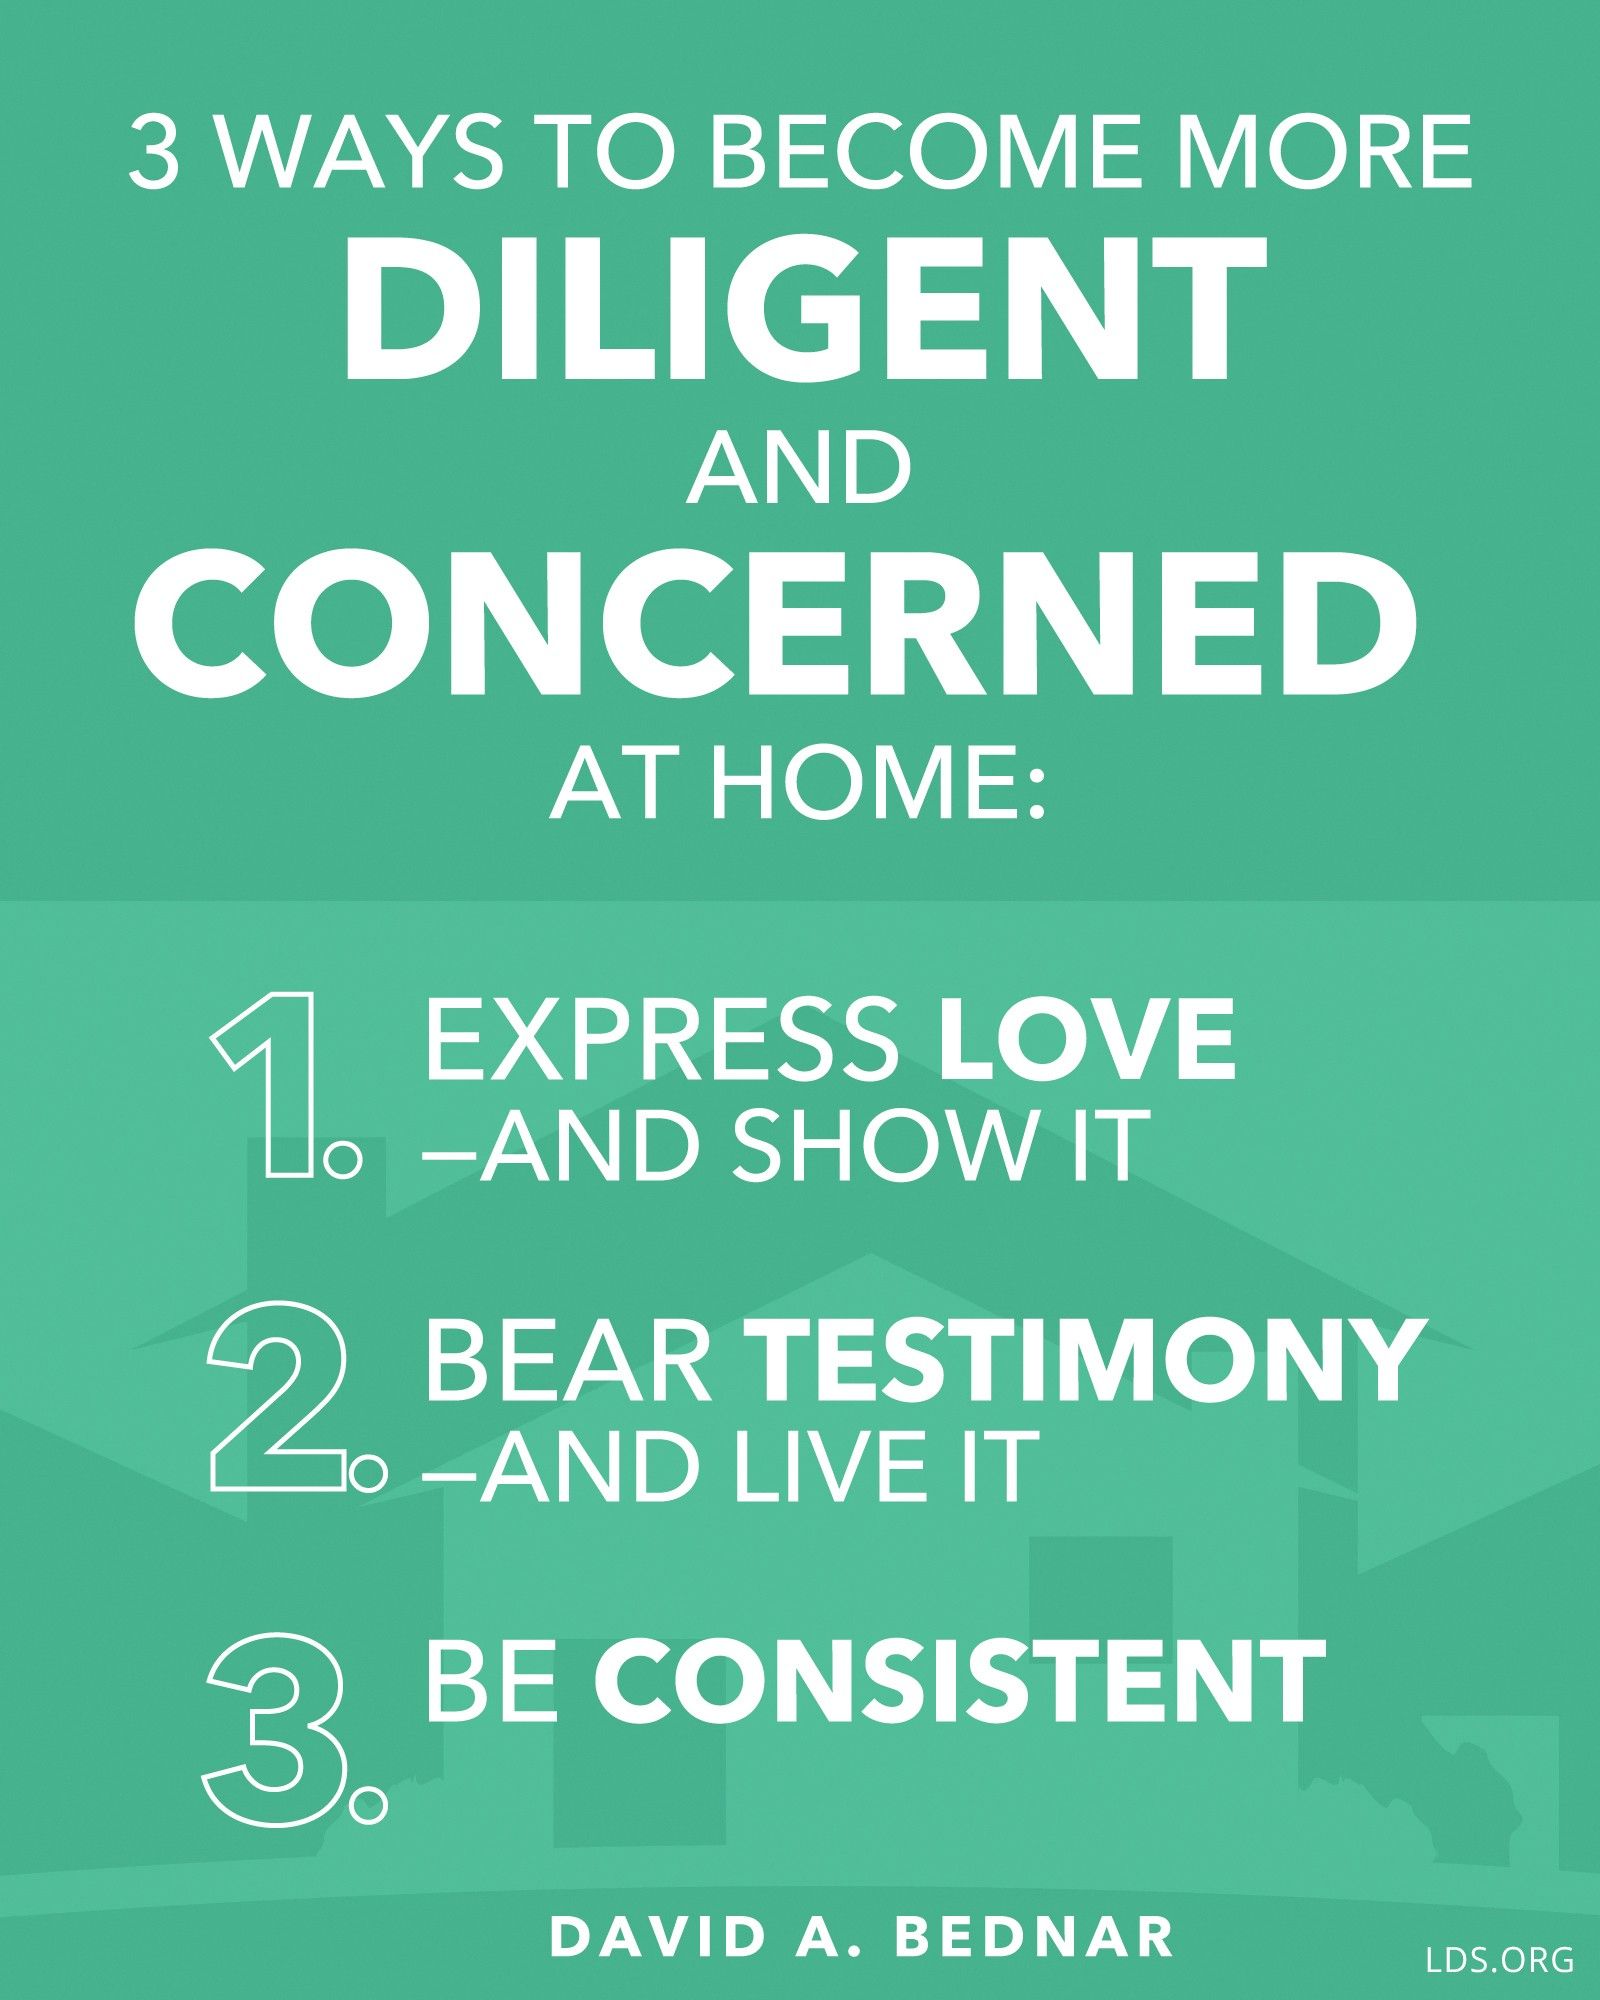 “Three ways to become more diligent and concerned at home: 1. Express love—and show it. 2. Bear testimony—and live it. 3. Be consistent.”—Elder David A. Bednar, “More Diligent and Concerned at Home”